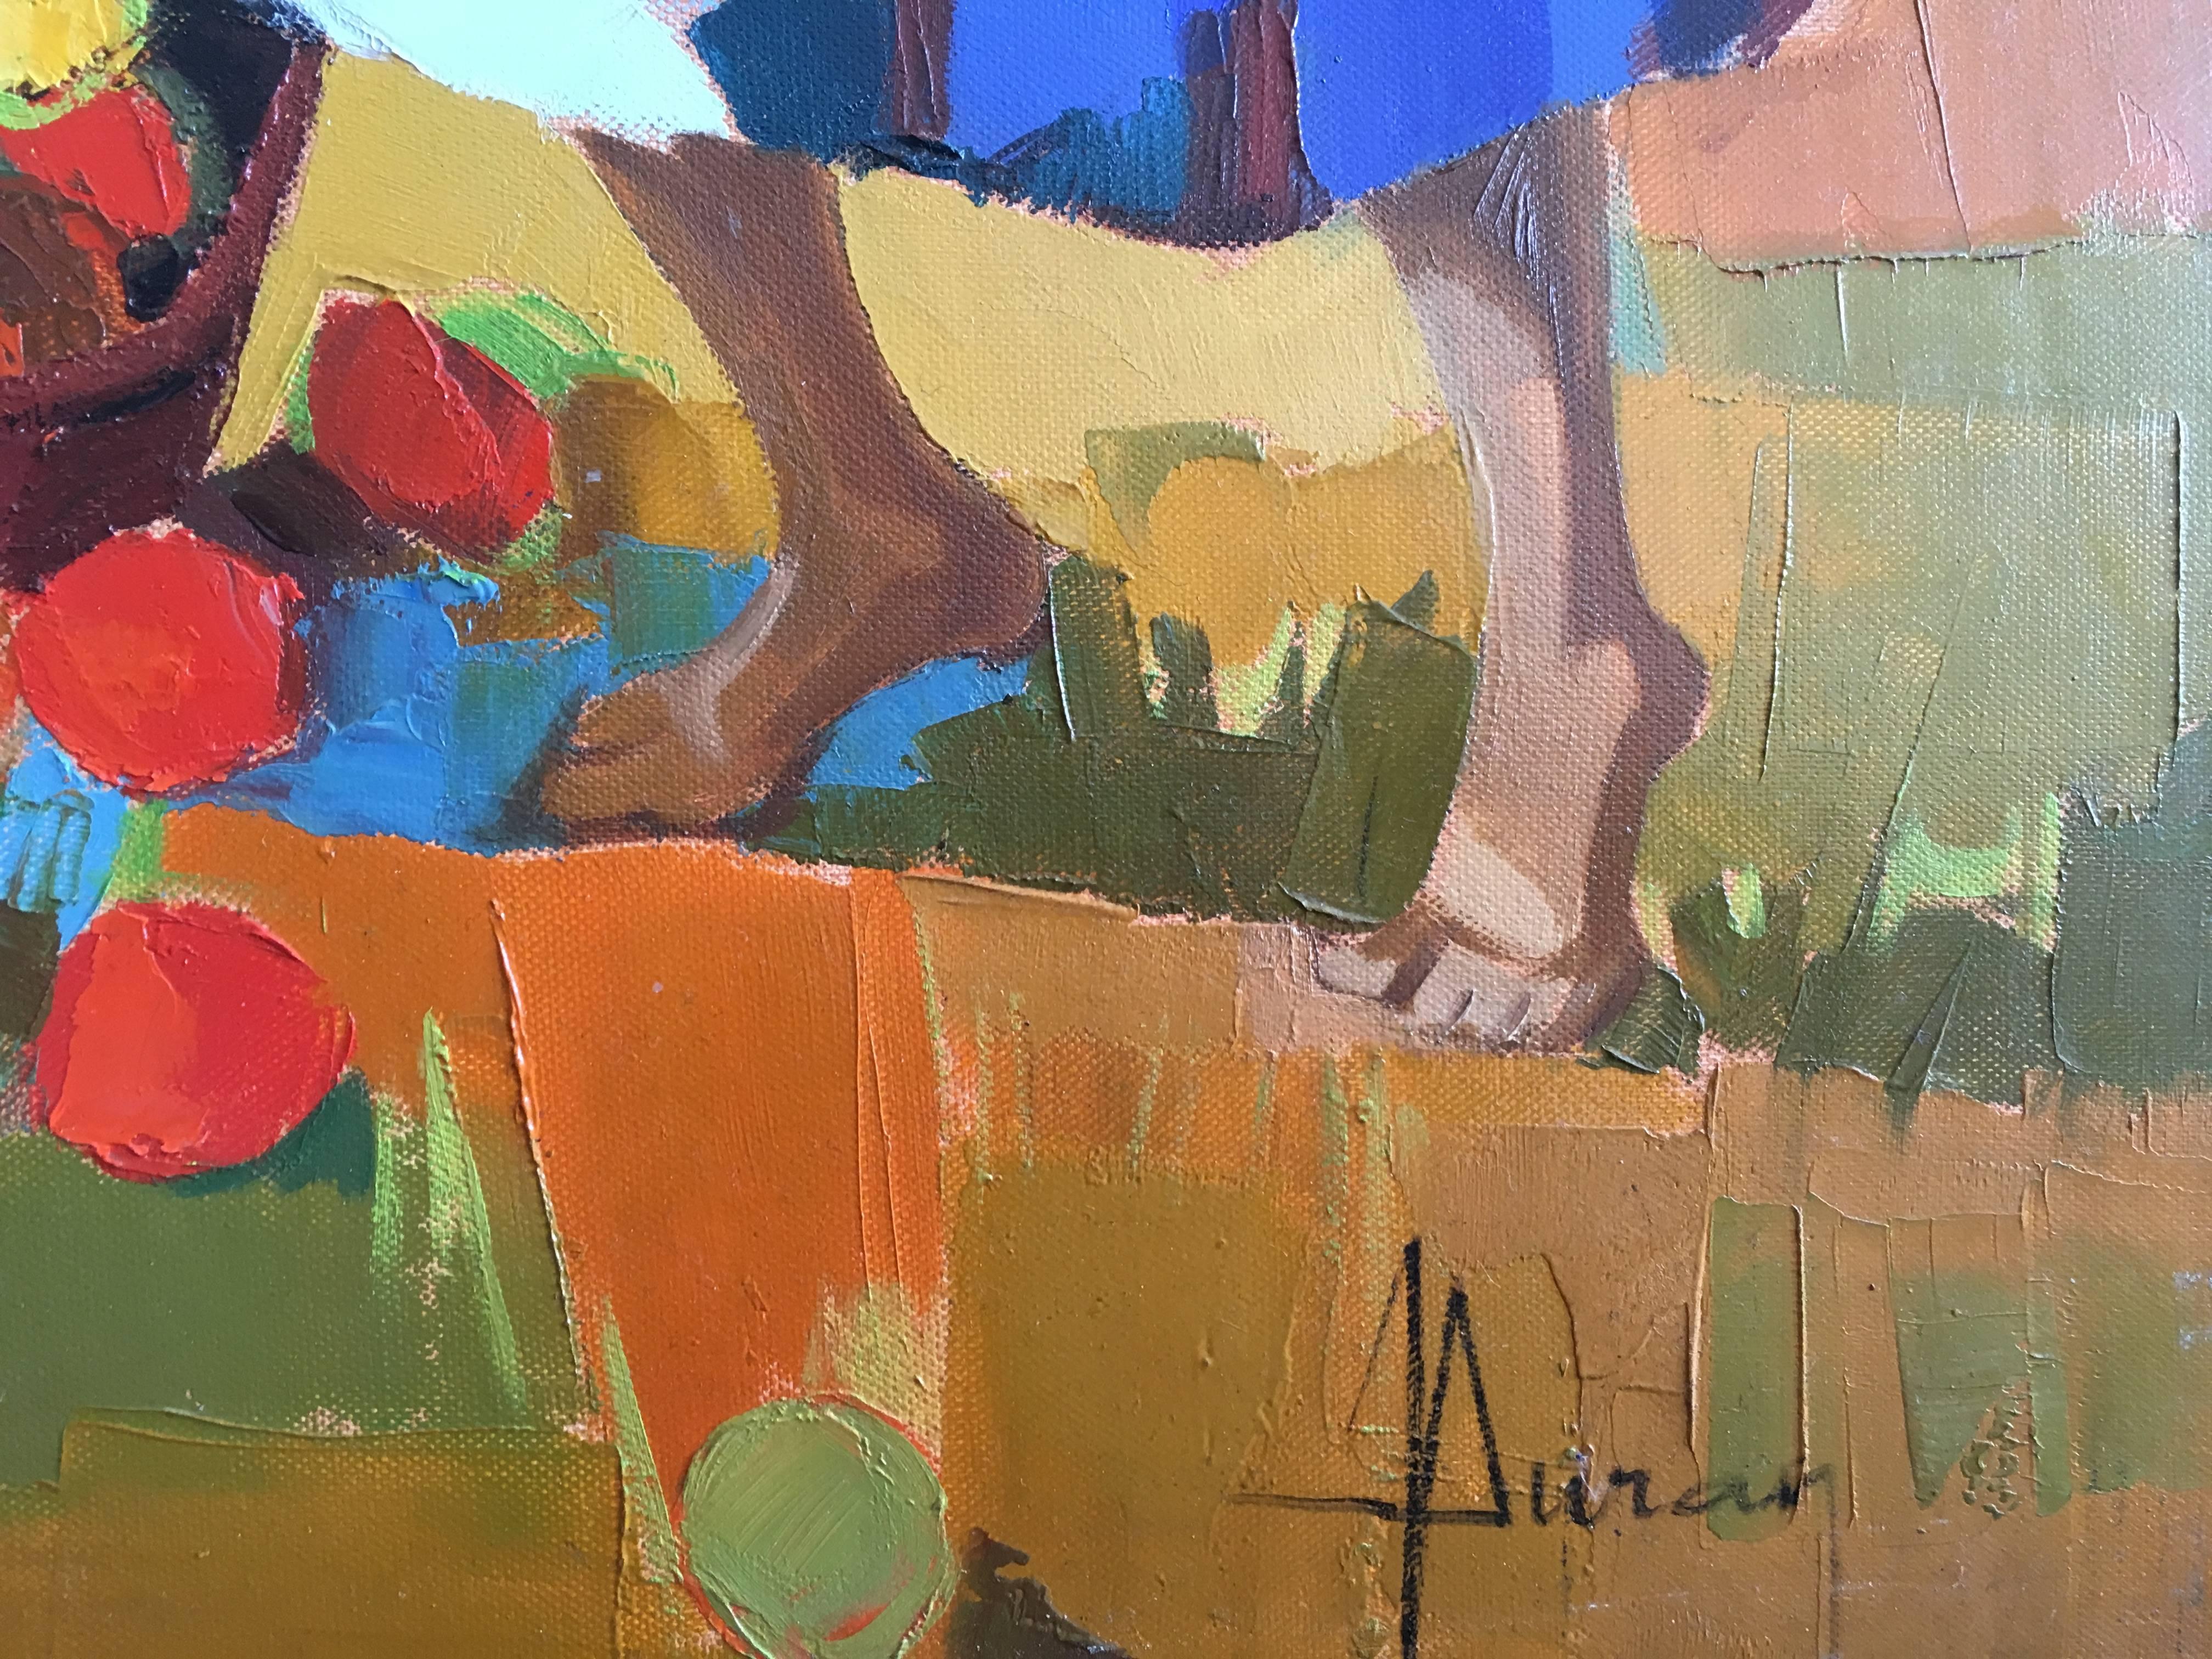 Harvest in the field After Summer, Oil on canvas, Colorful Expressionist Style 12